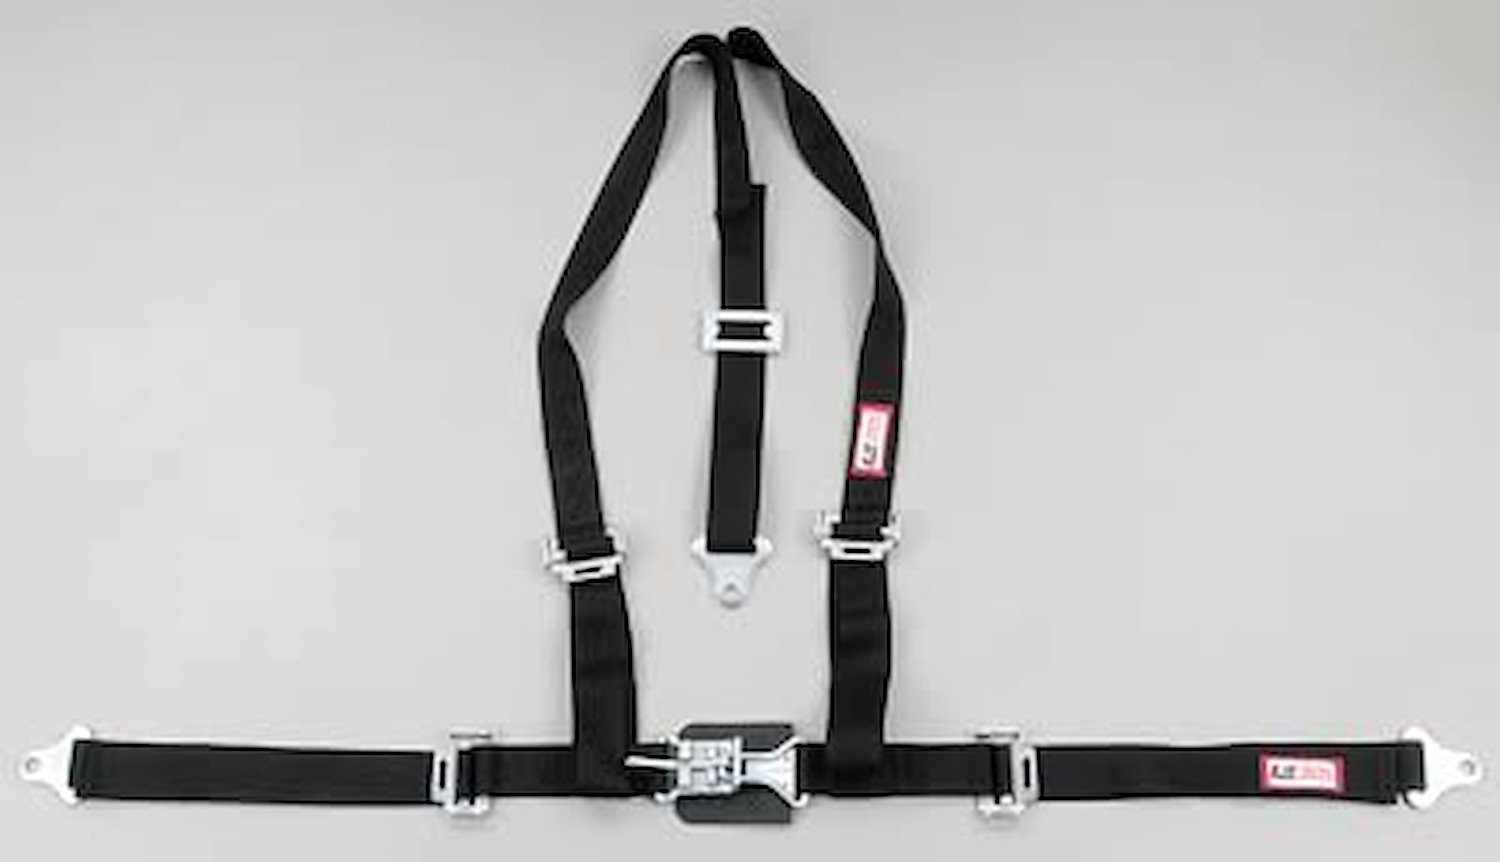 NON-SFI L&L HARNESS 2 PULL DOWN Lap Belt SEWN IN 2 S.H. V ROLL BAR Mount ALL BOLT ENDS GRAY